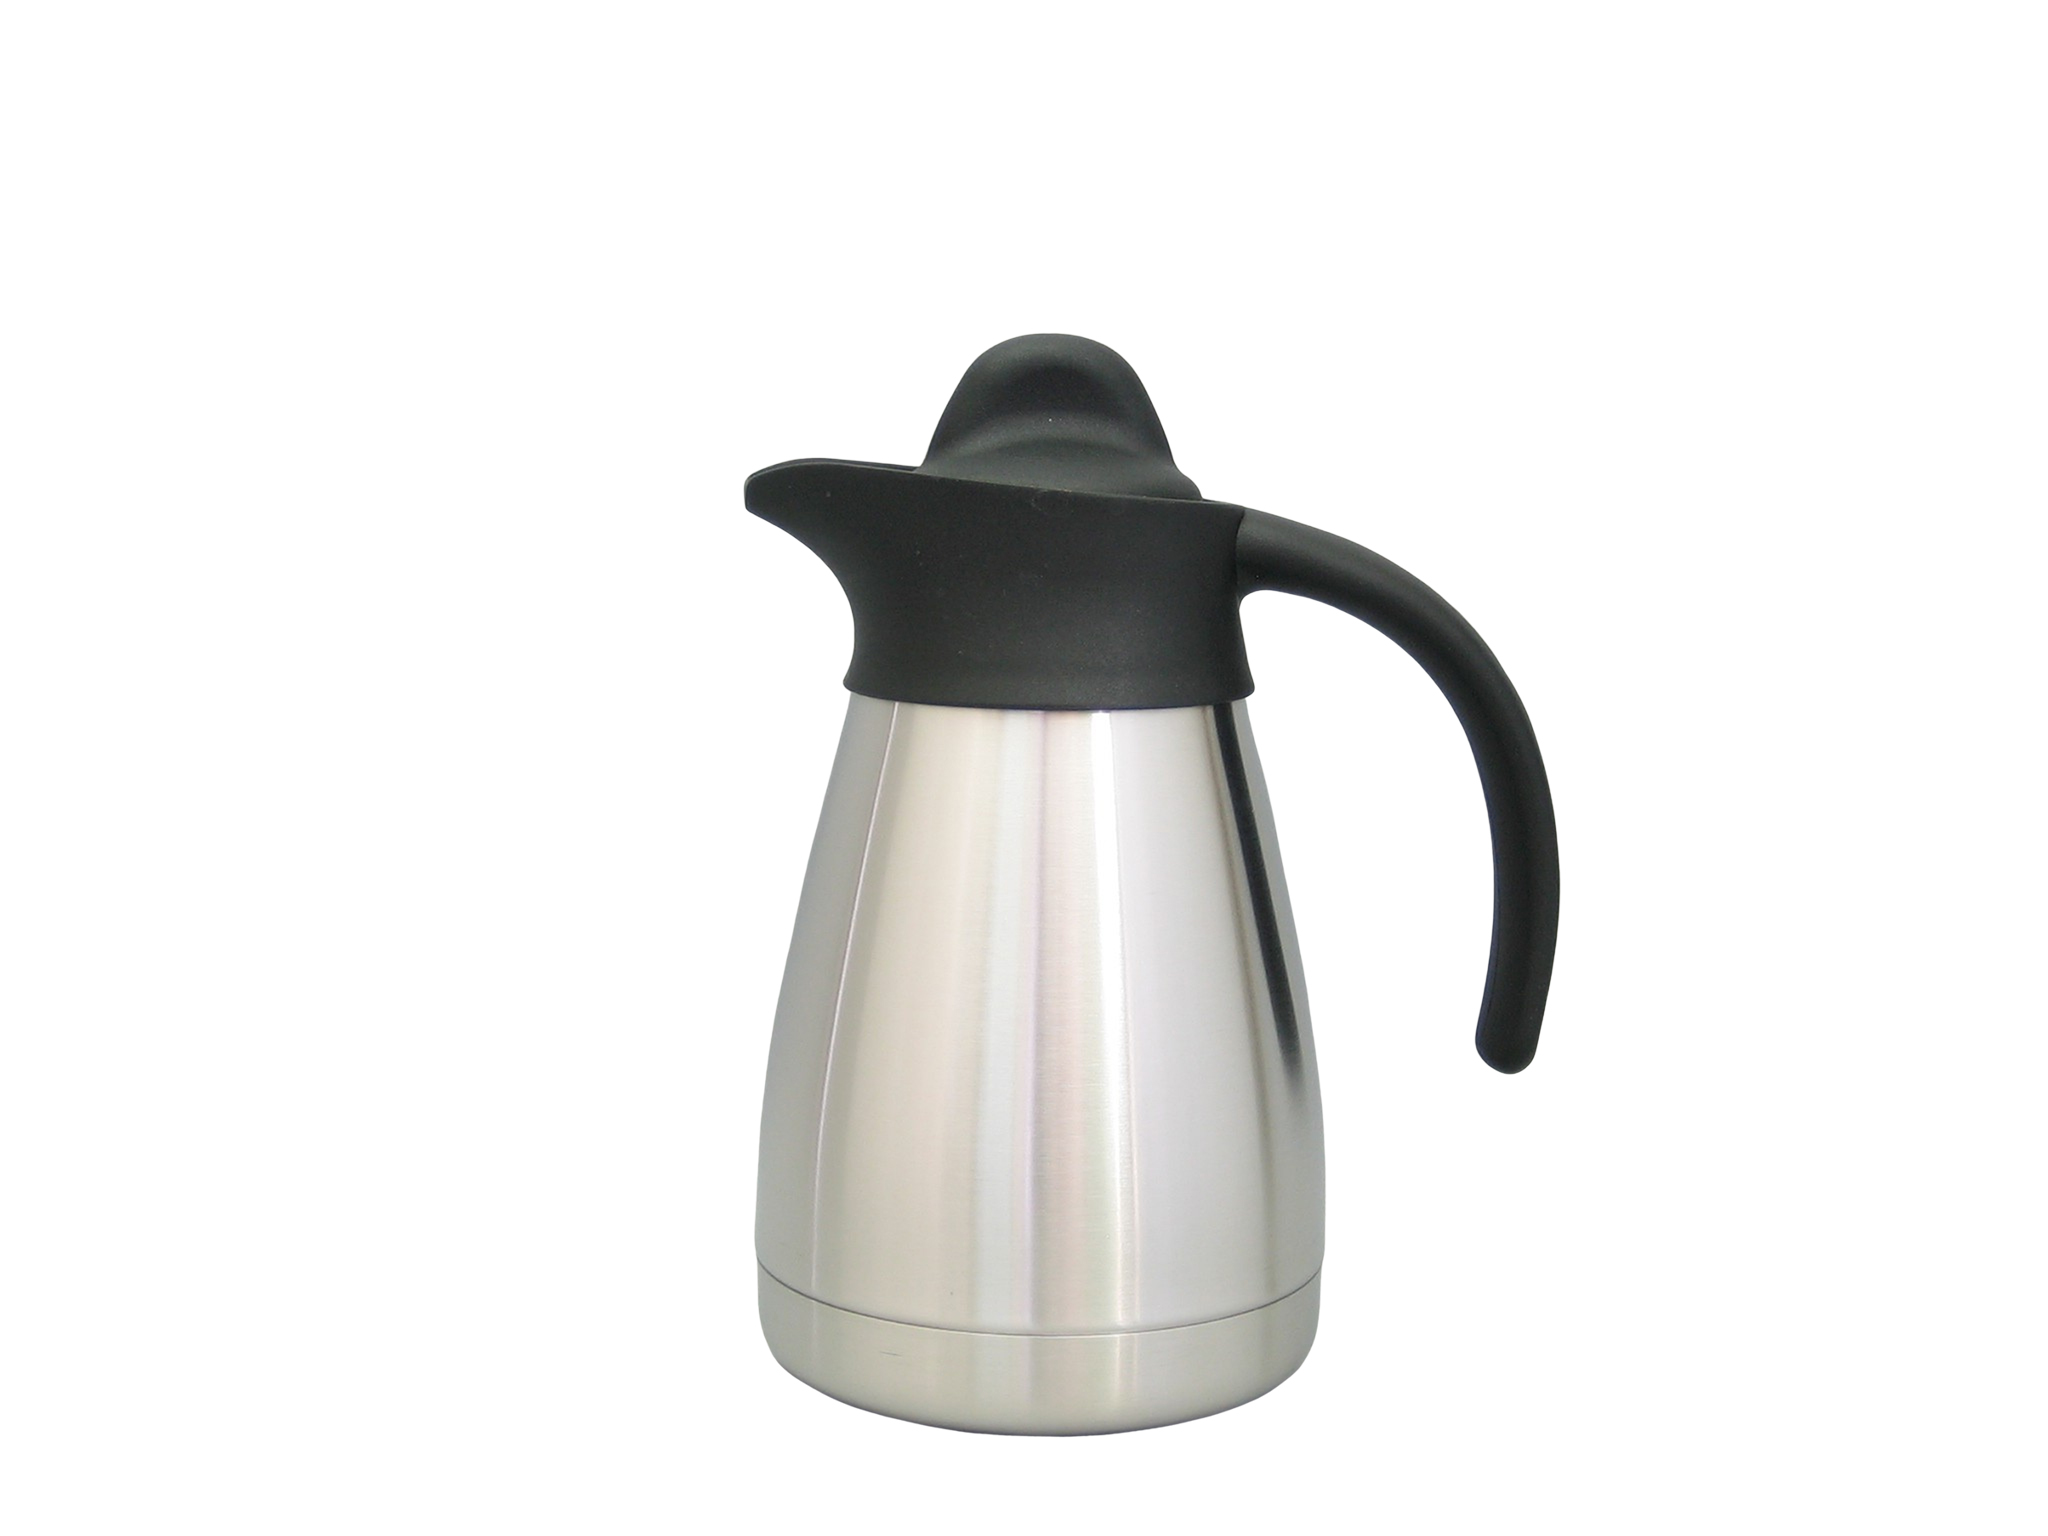 V0599-S02 - Vacuum carafe SS unbreakable 0.5 L (screw stopper) - Isobel Silver Line